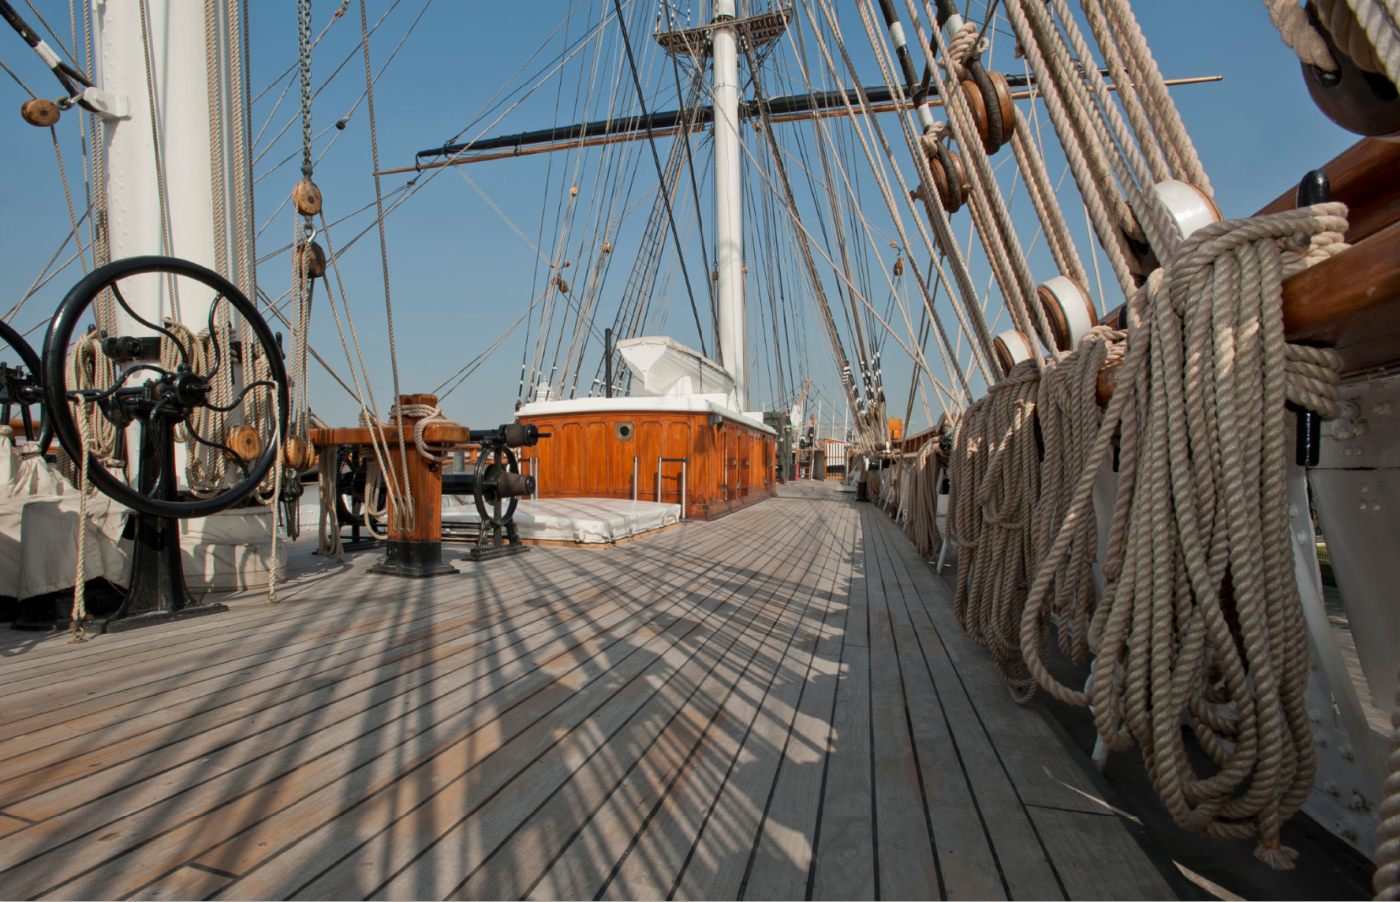 An image showing 'Cutty Sark'